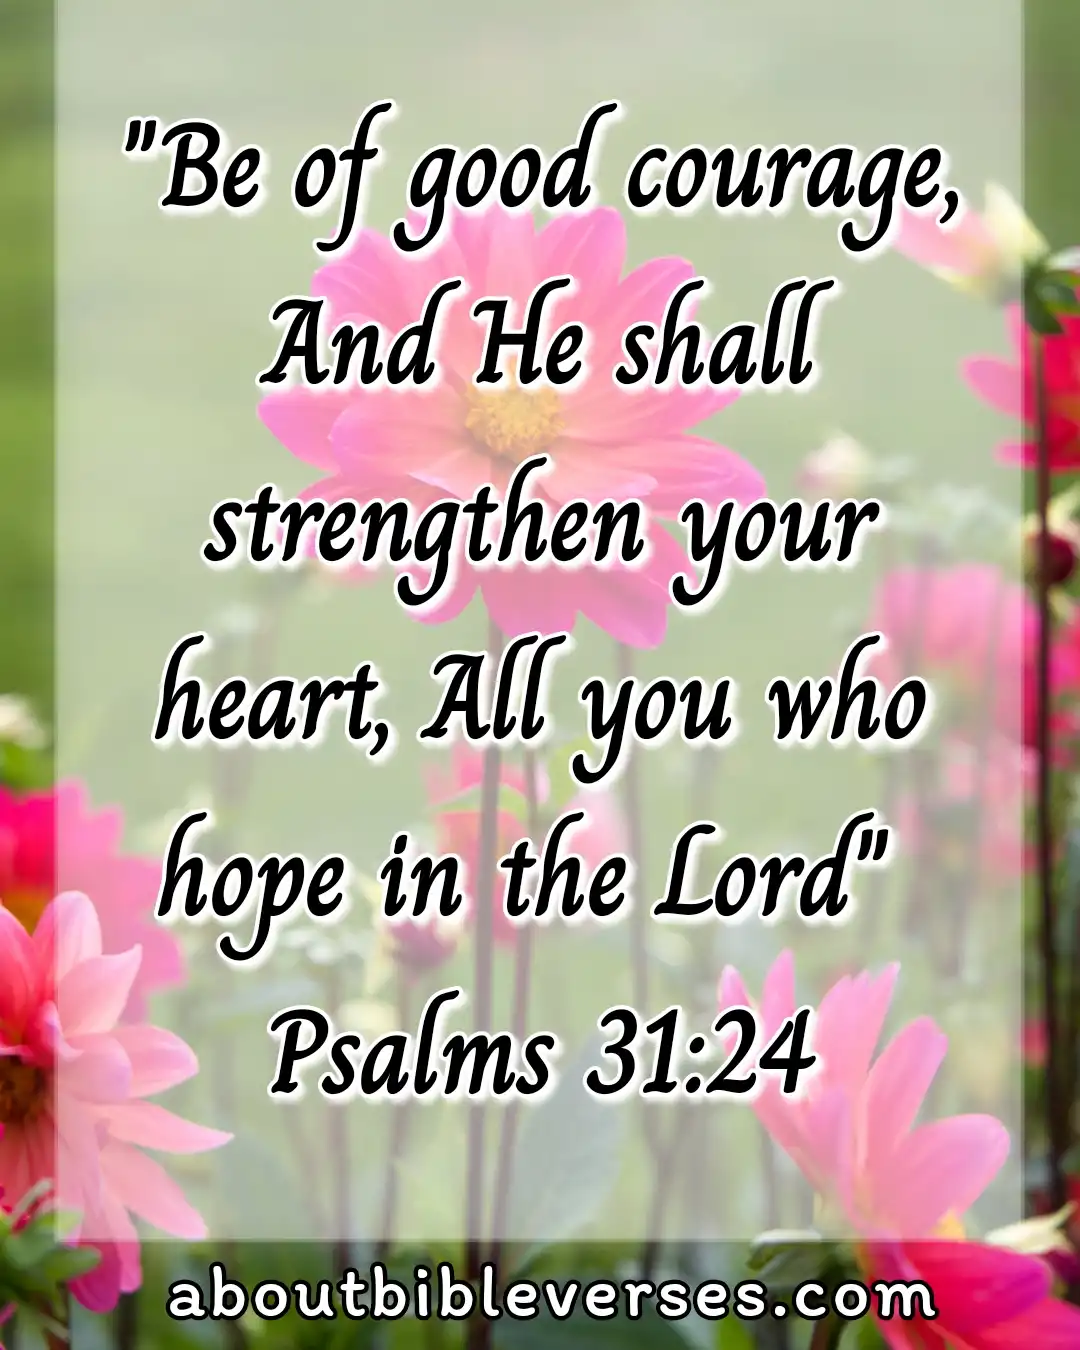 Bible Verses For Strength And Courage In Difficult Times (Psalm 31:24)